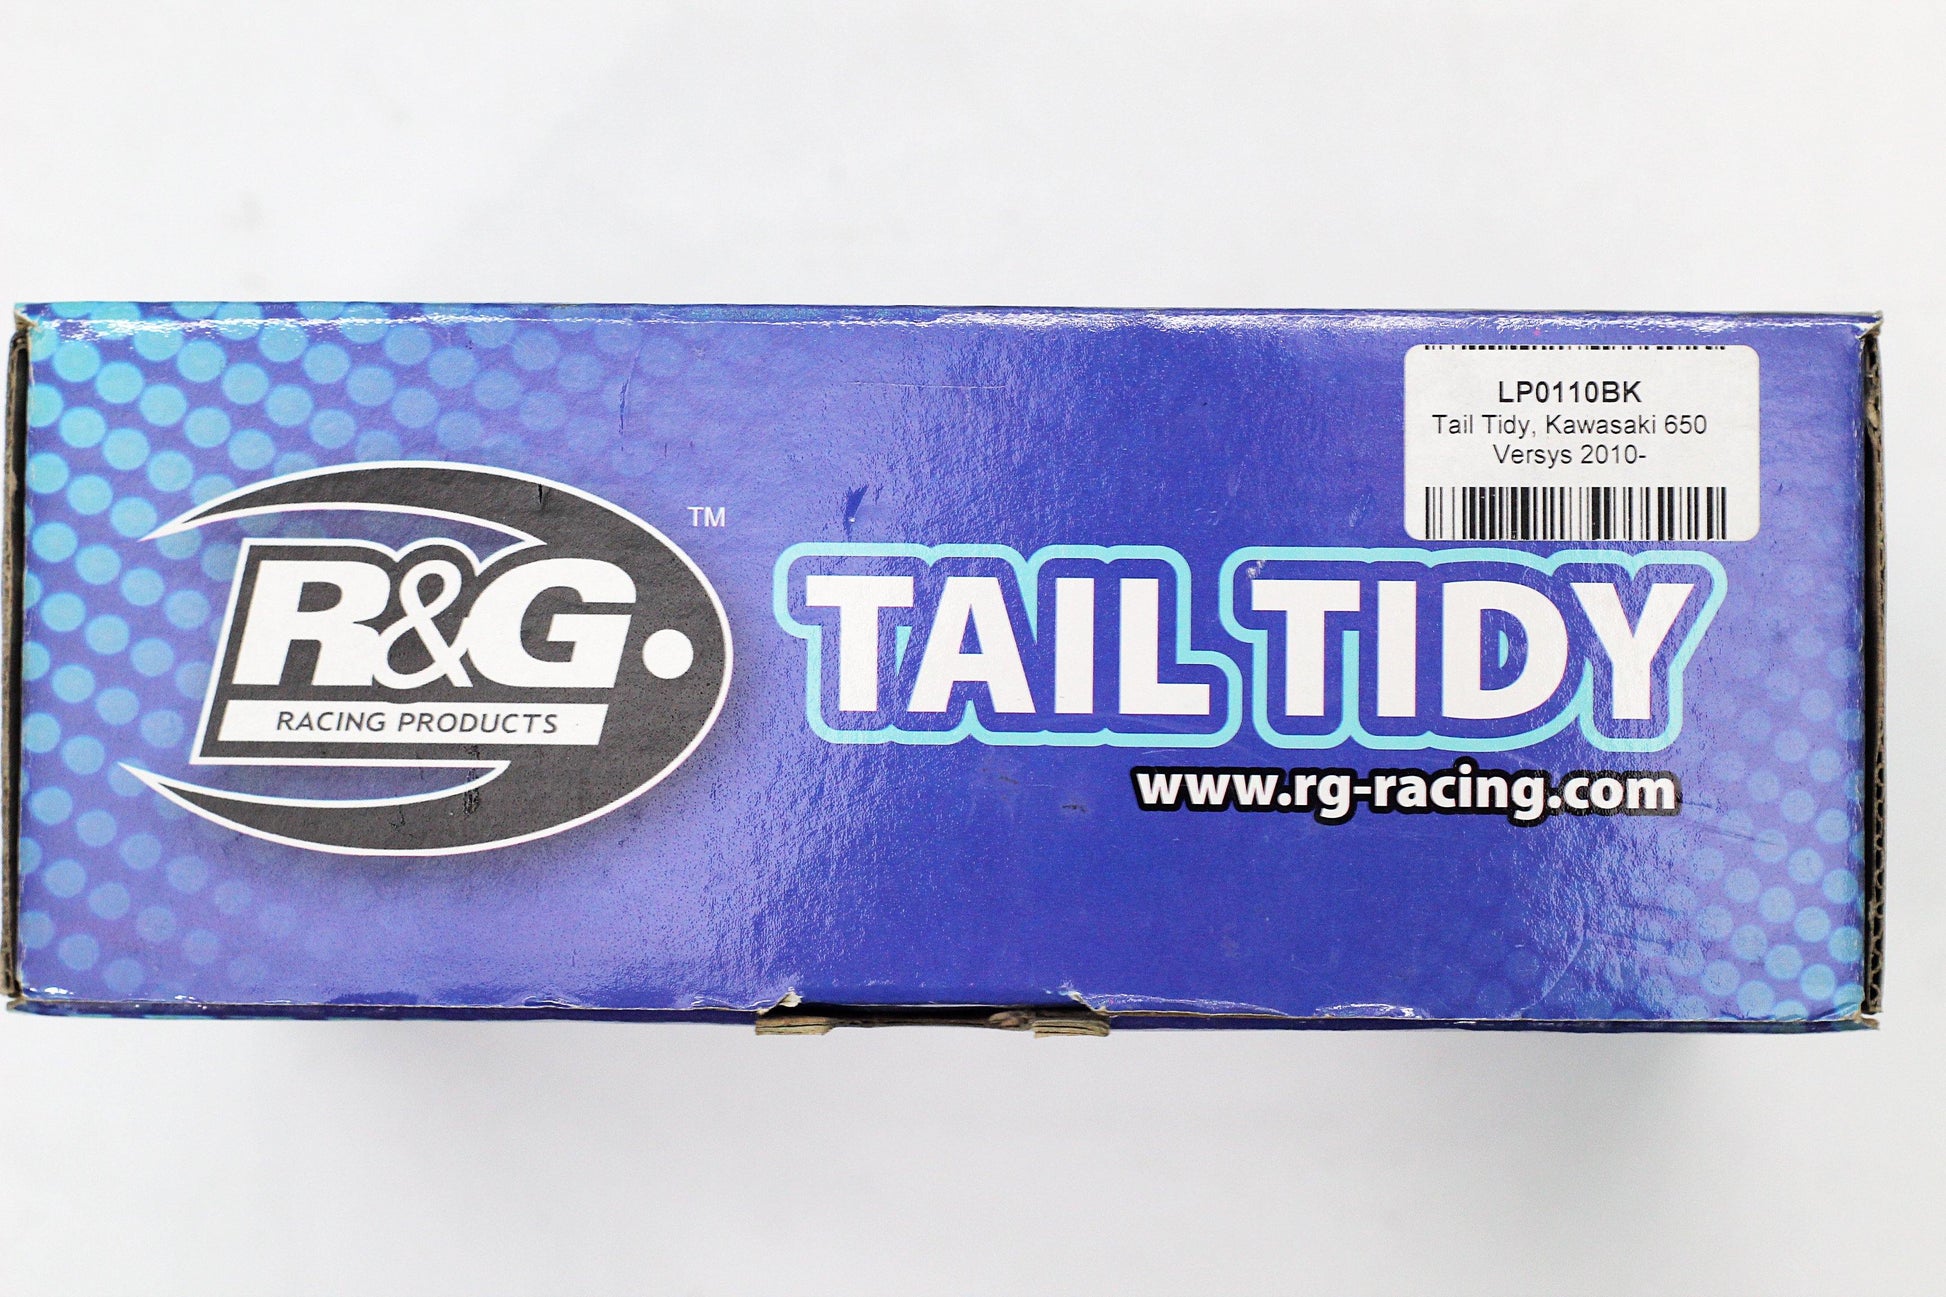 R&G Tail Tidy fits for the Kawasaki Versys 650 ('10-'14) - Durian Bikers